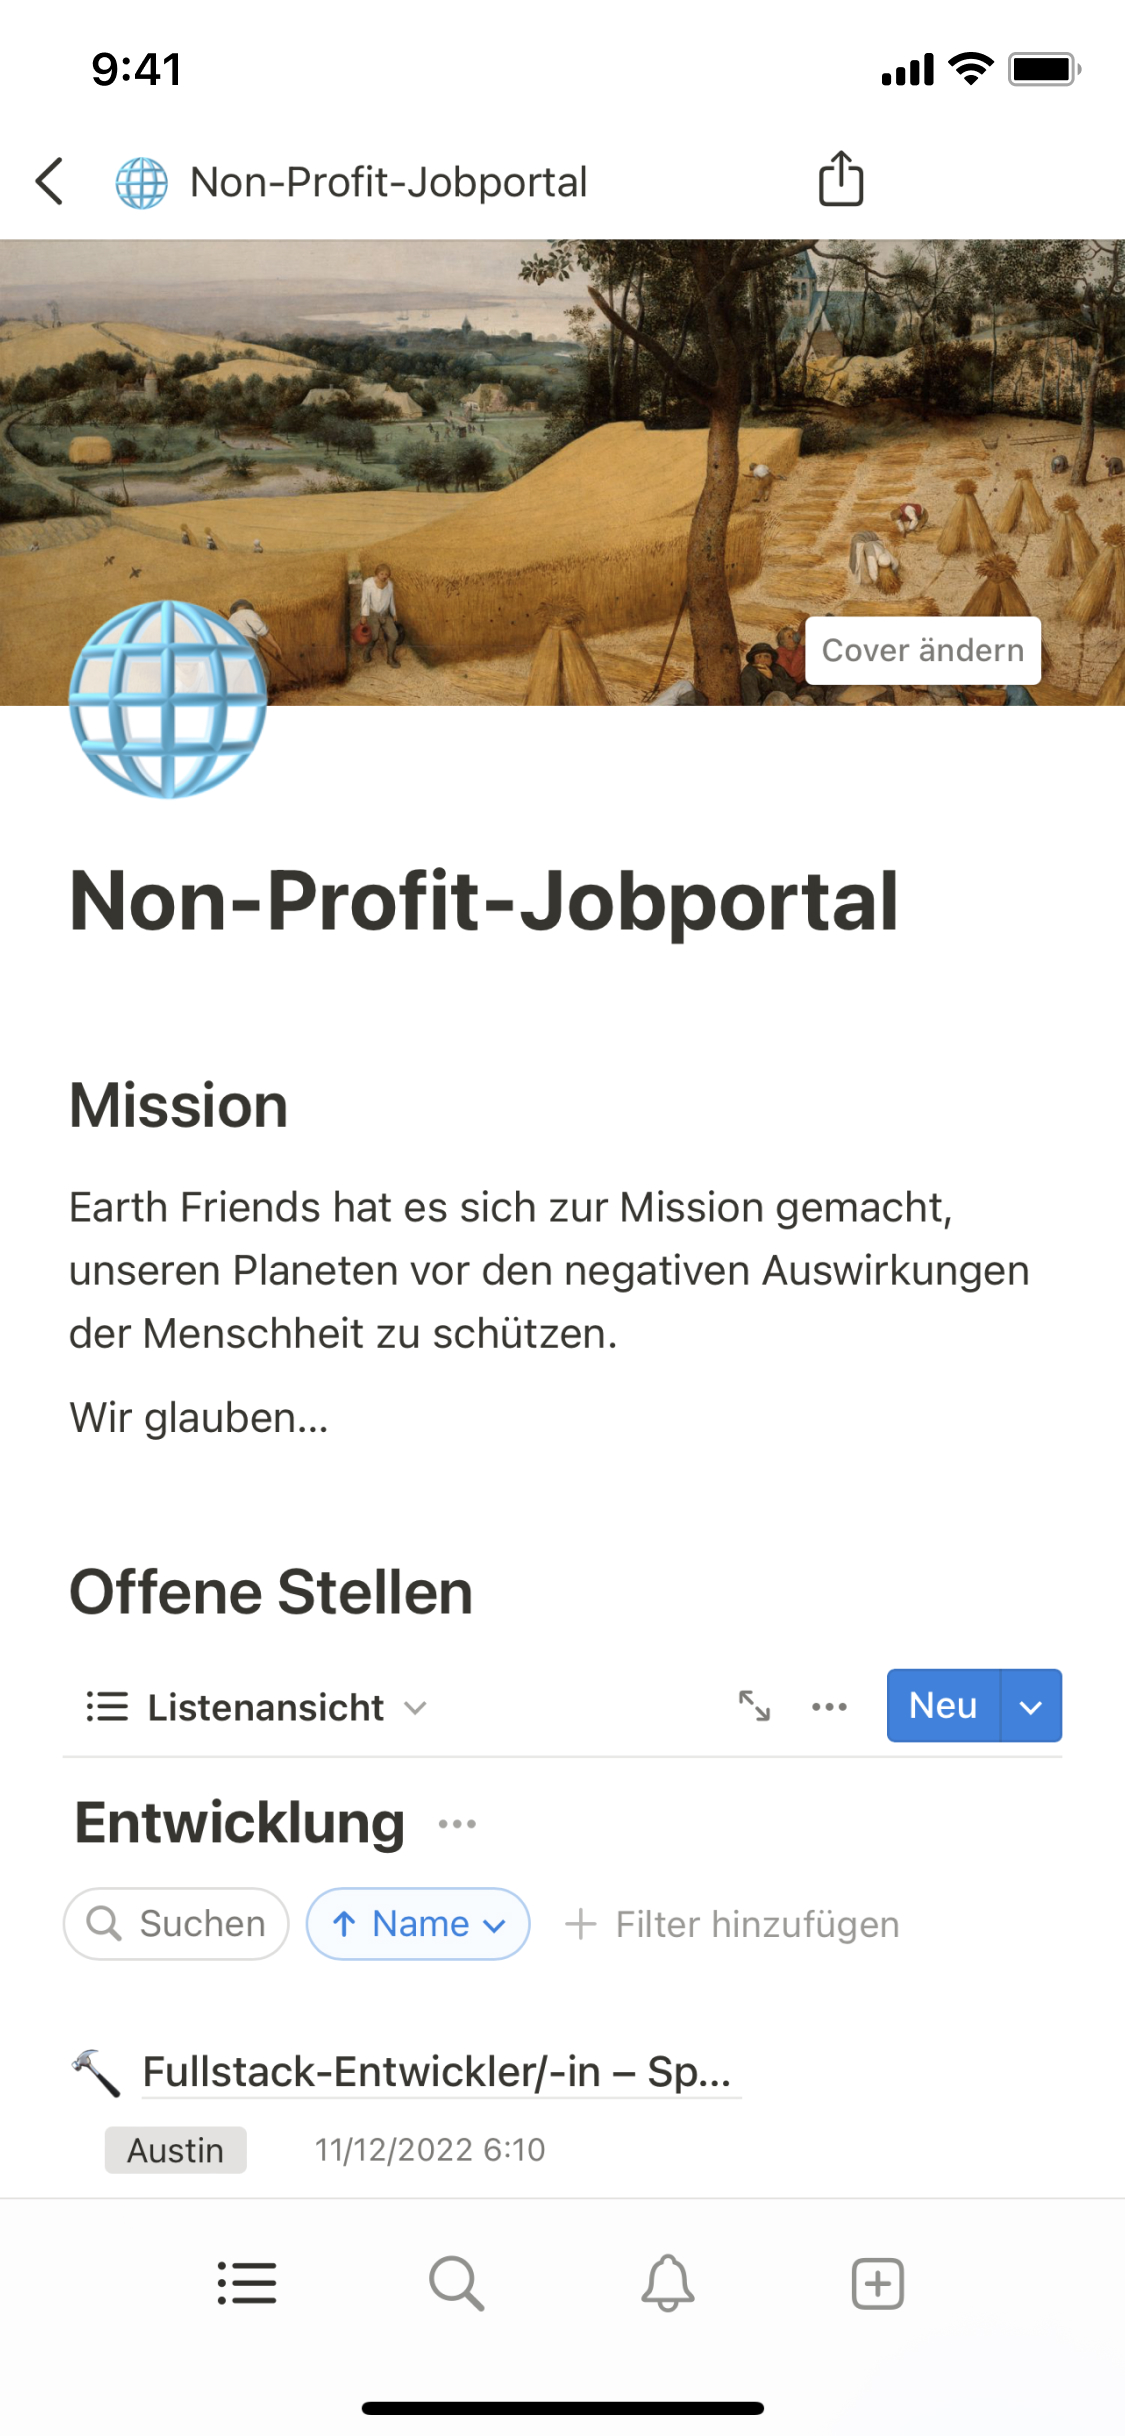 The mobile image for the Nonprofit job board template